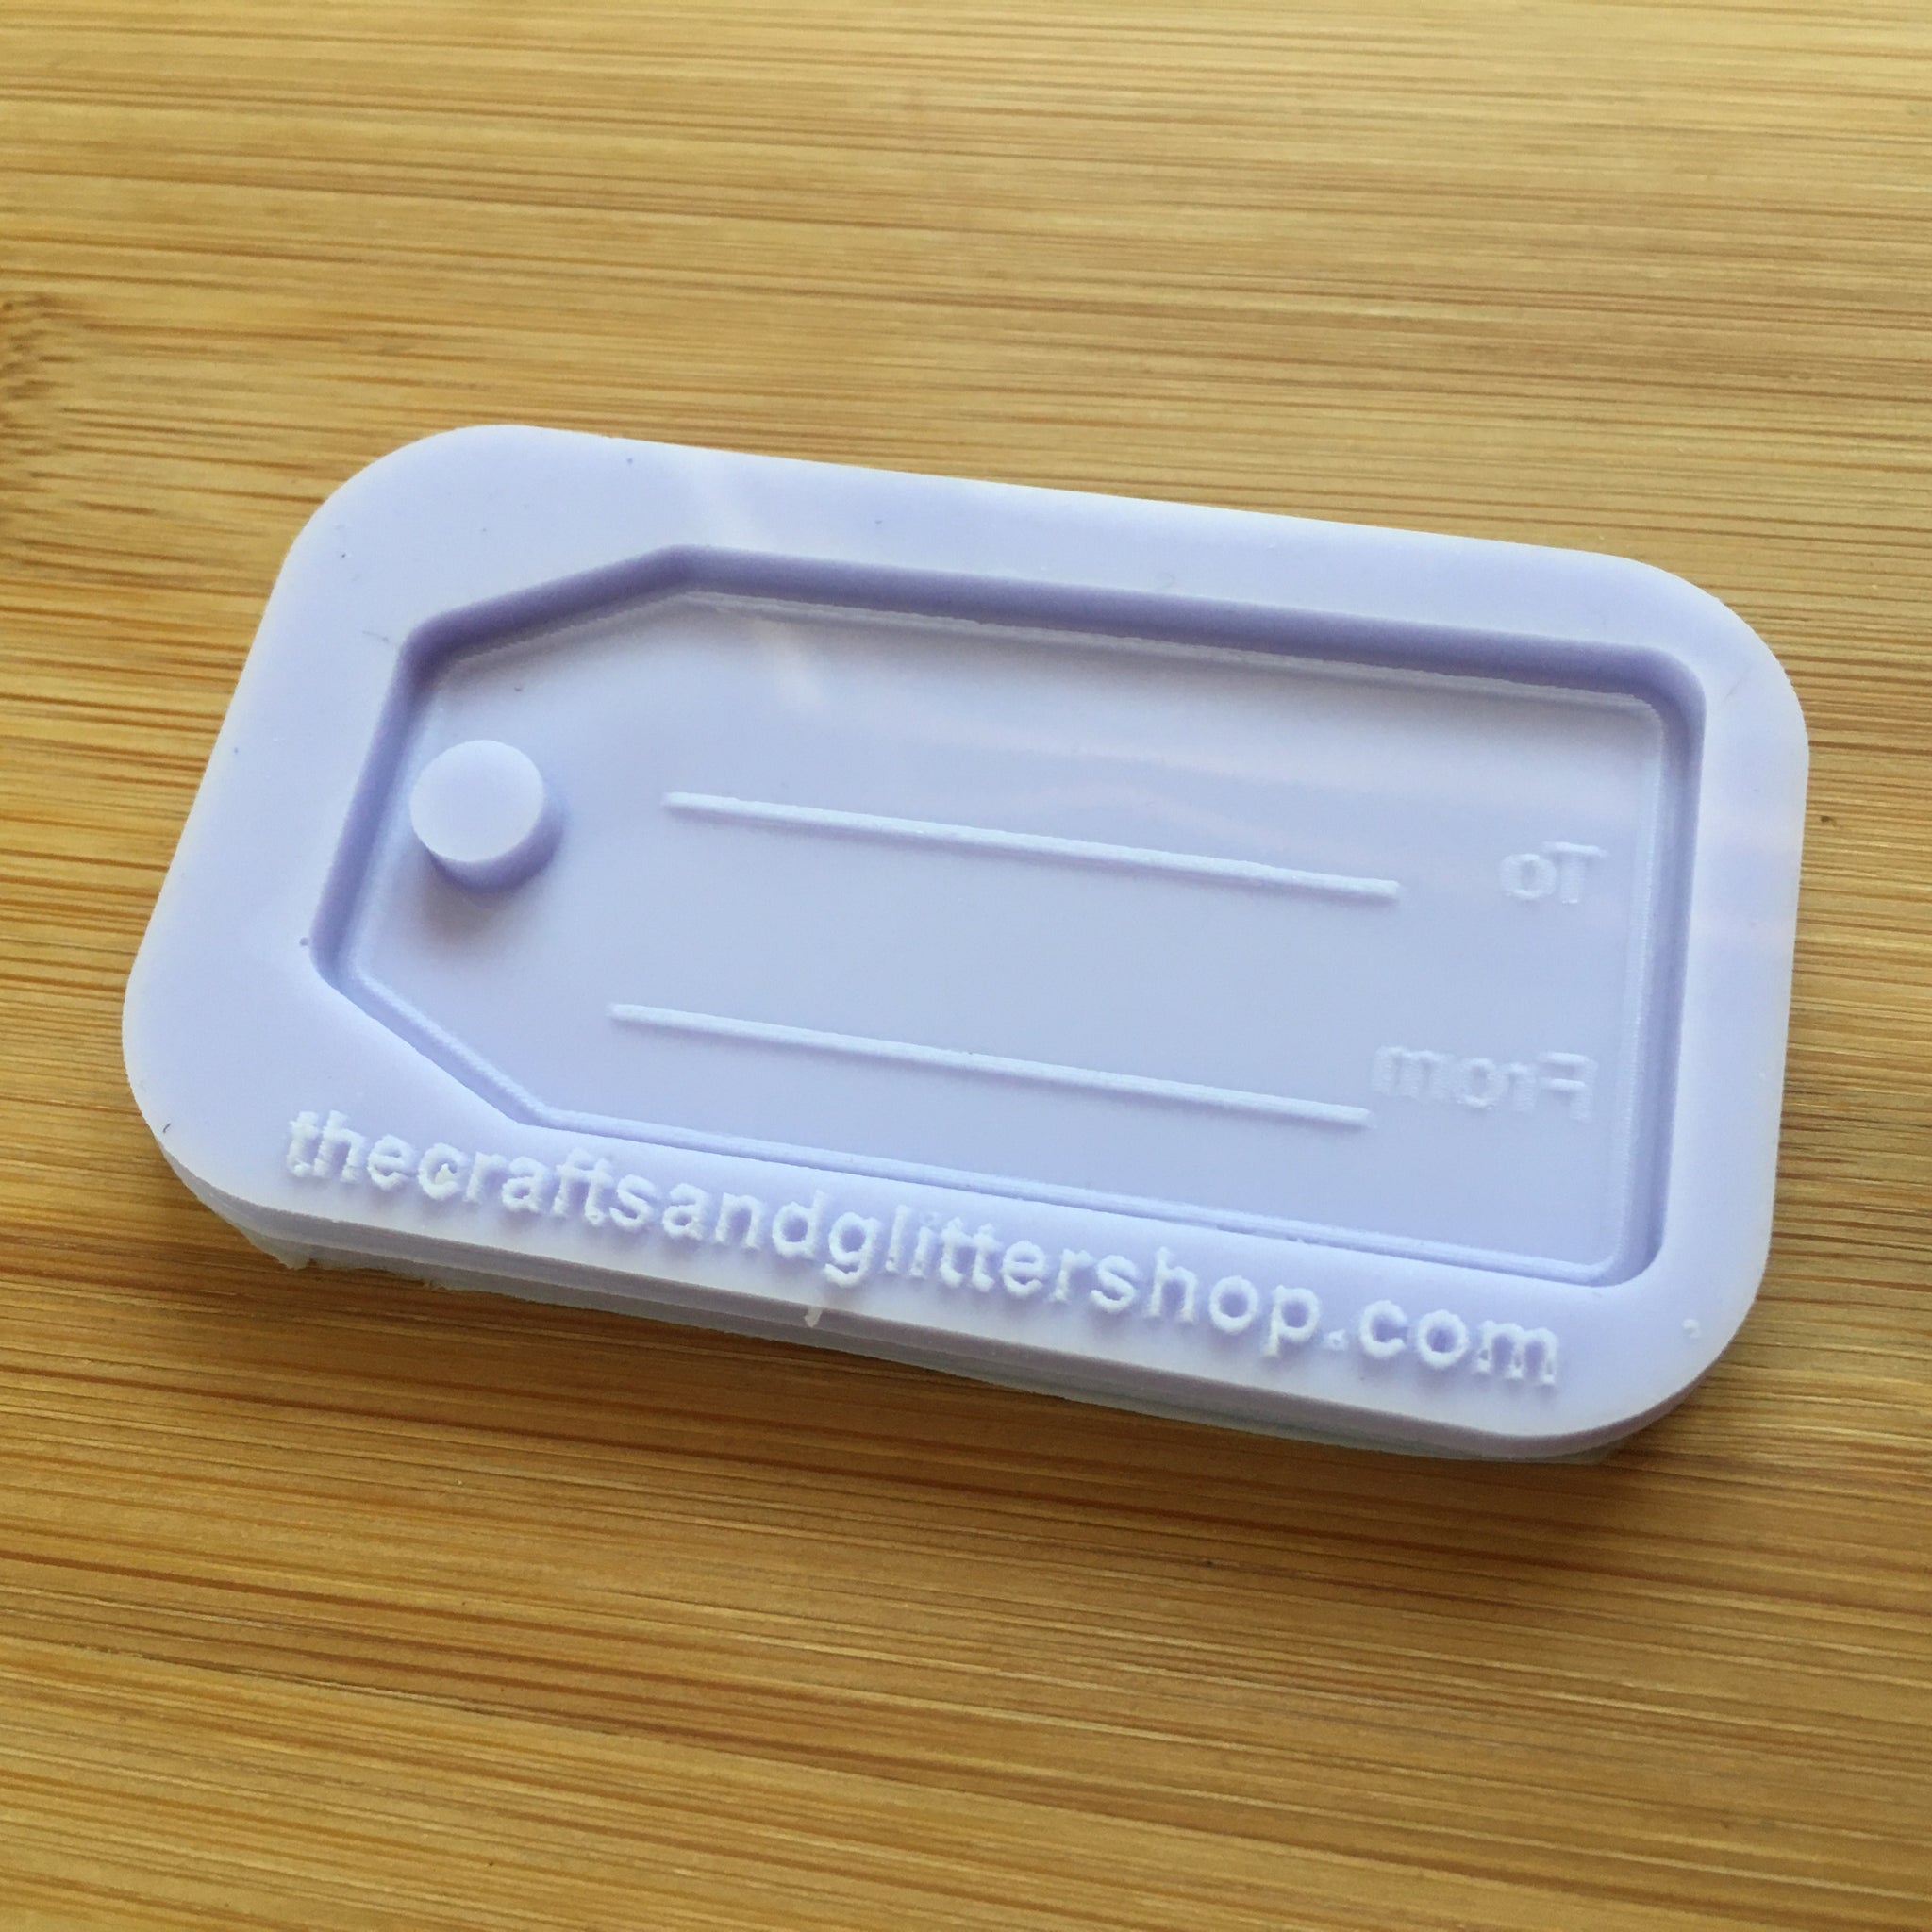 First aid,life star,cake Silicone rubber Flexible Food Safe Mold